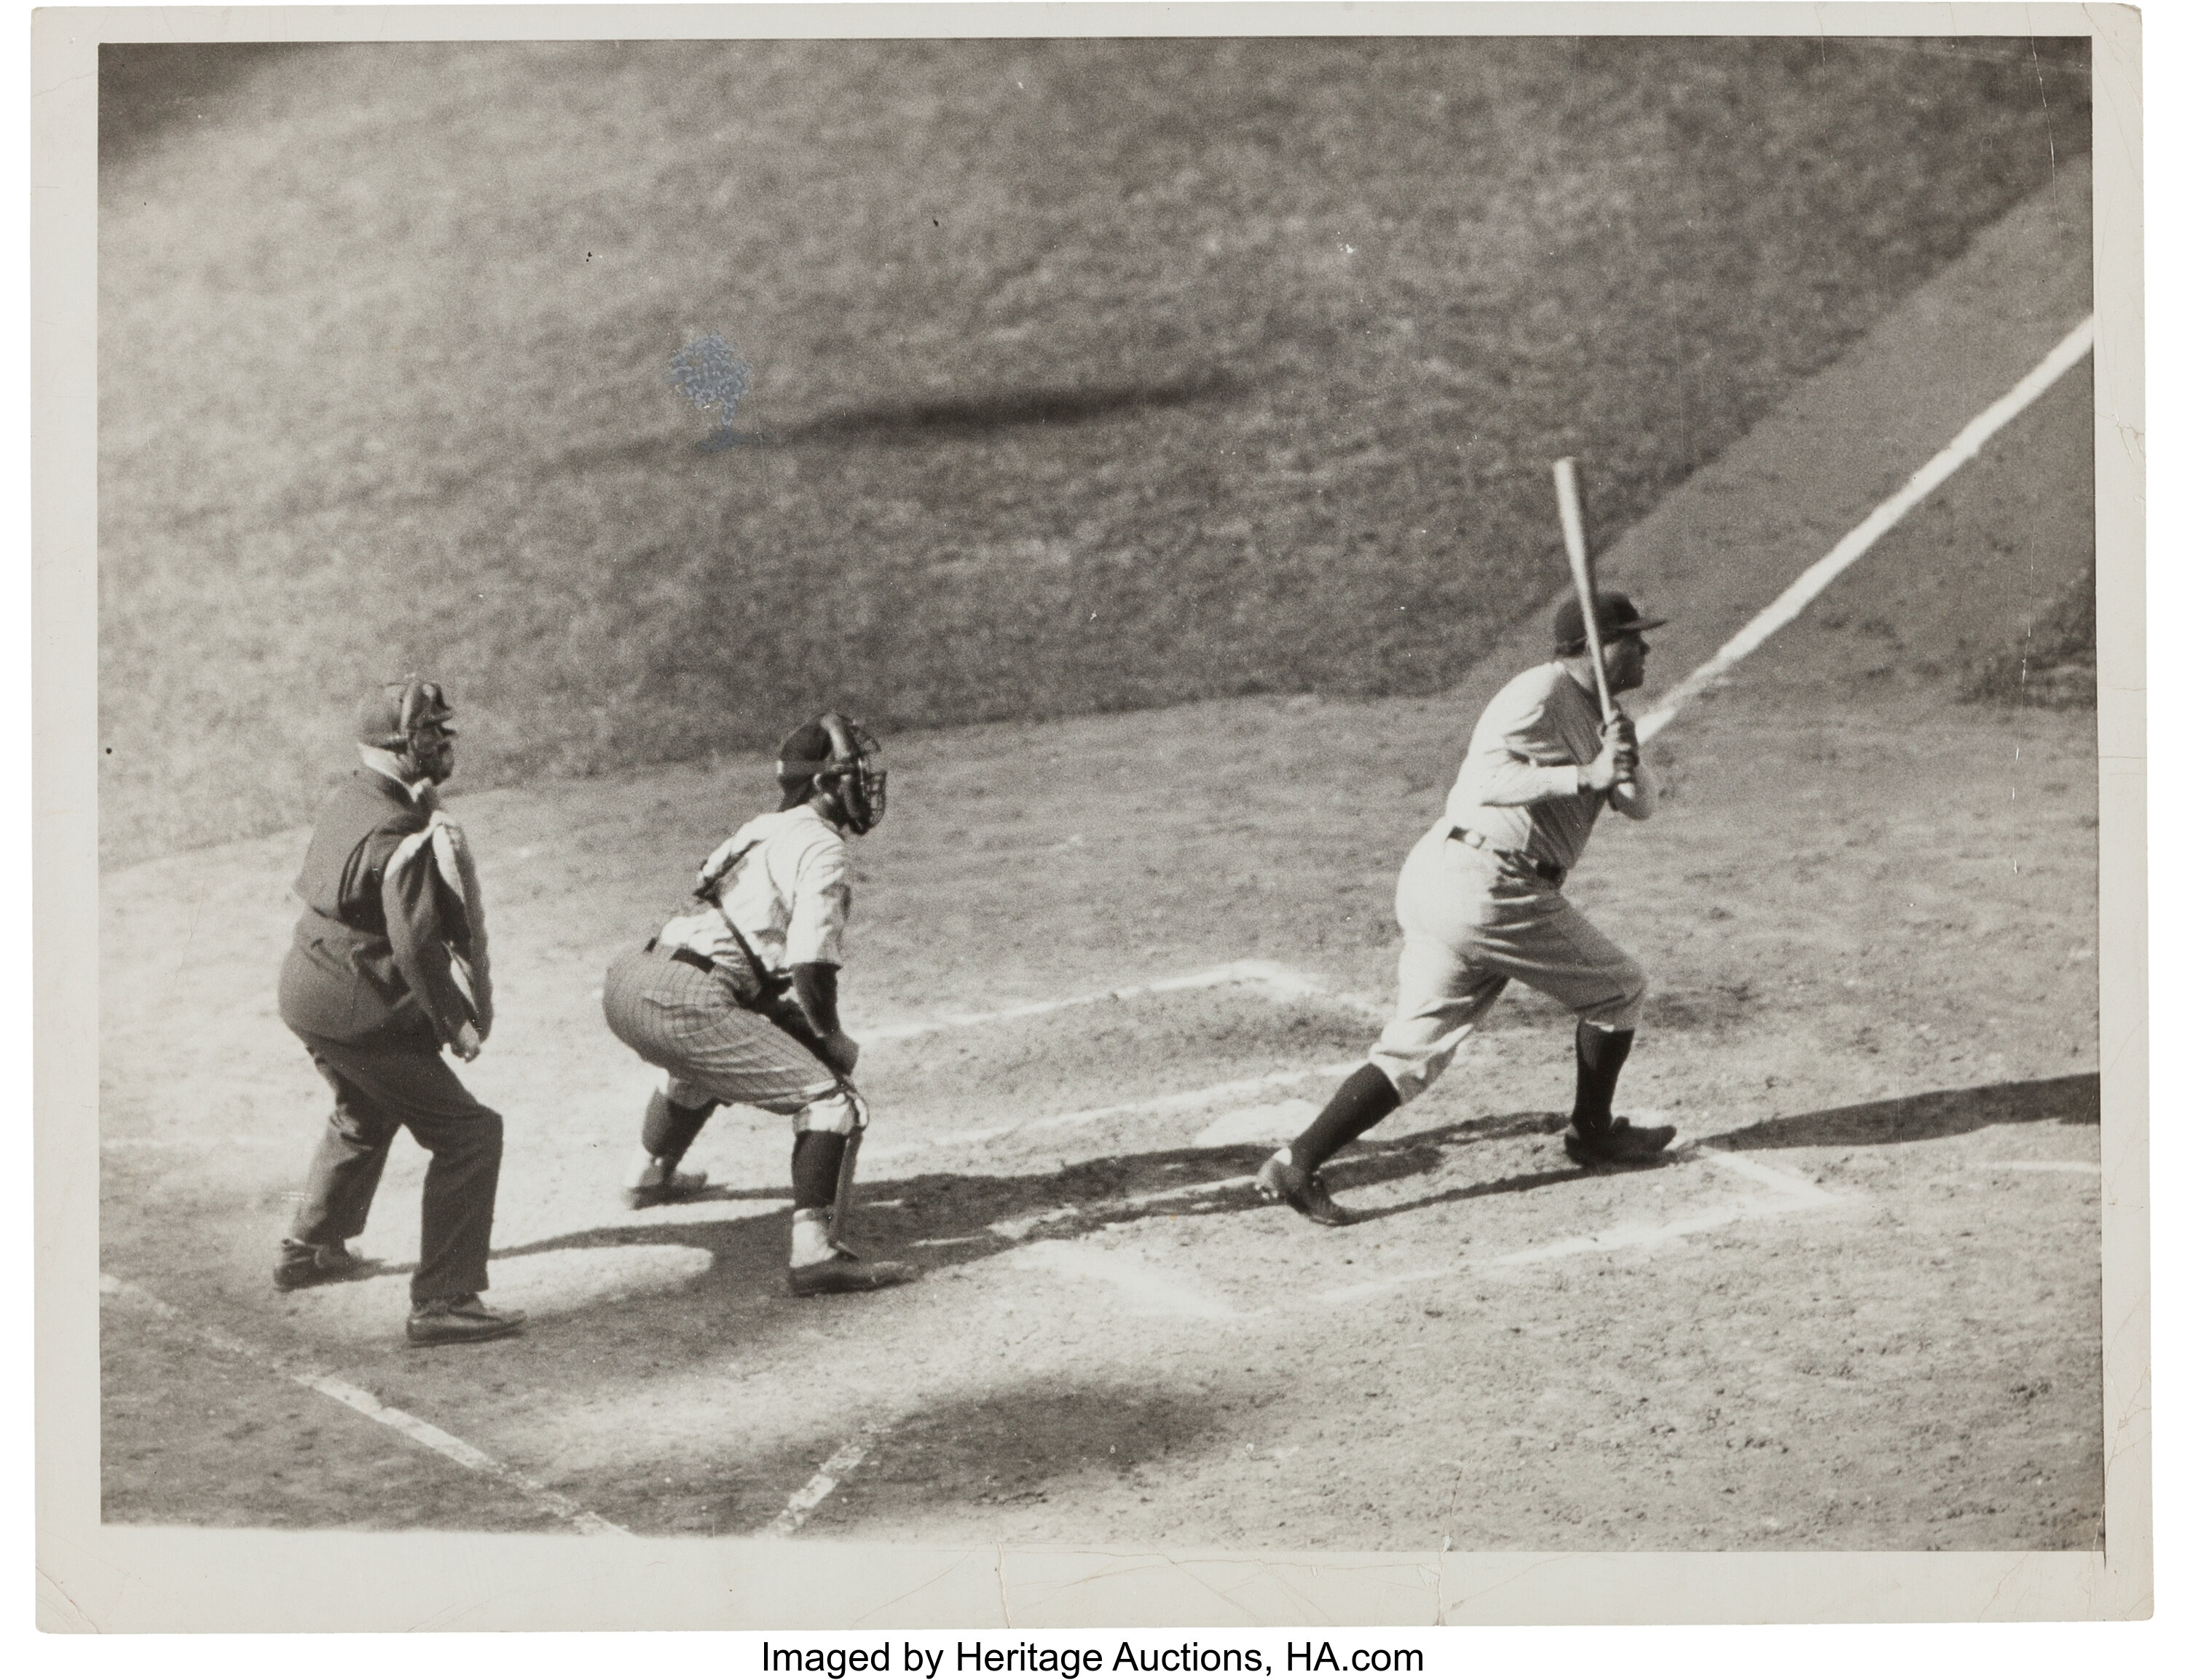 1932 Babe Ruth Homerun Swing signed Photo Photograph by Redemption Road -  Pixels